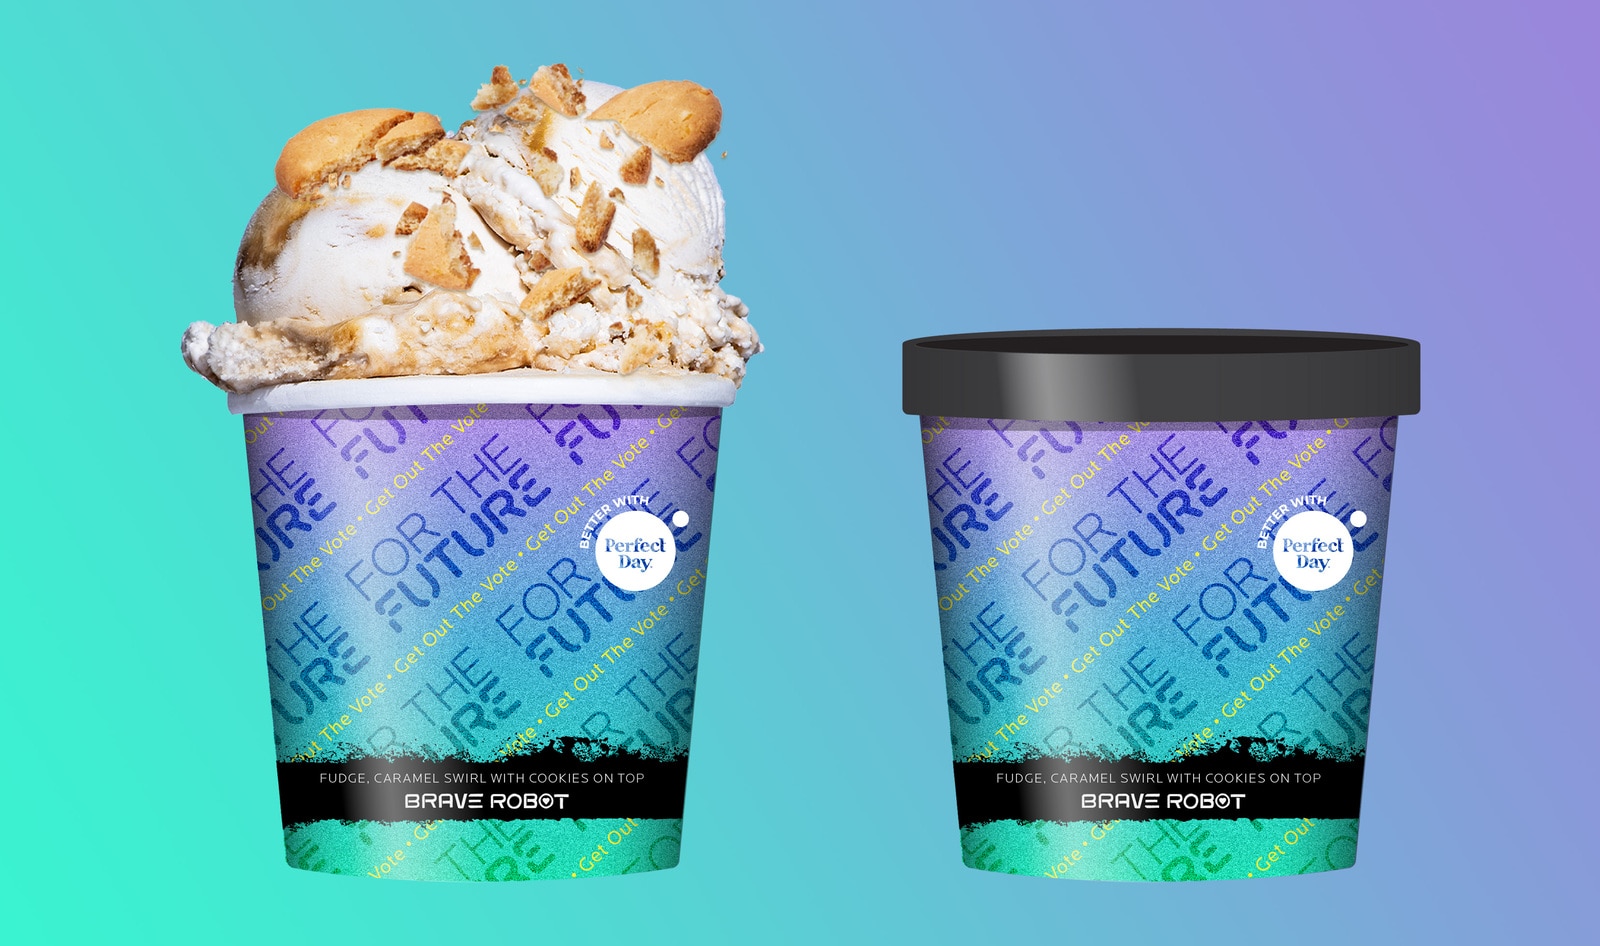 Vegan Ice Cream Brand Launches “Emotional Support” Package for Election Week